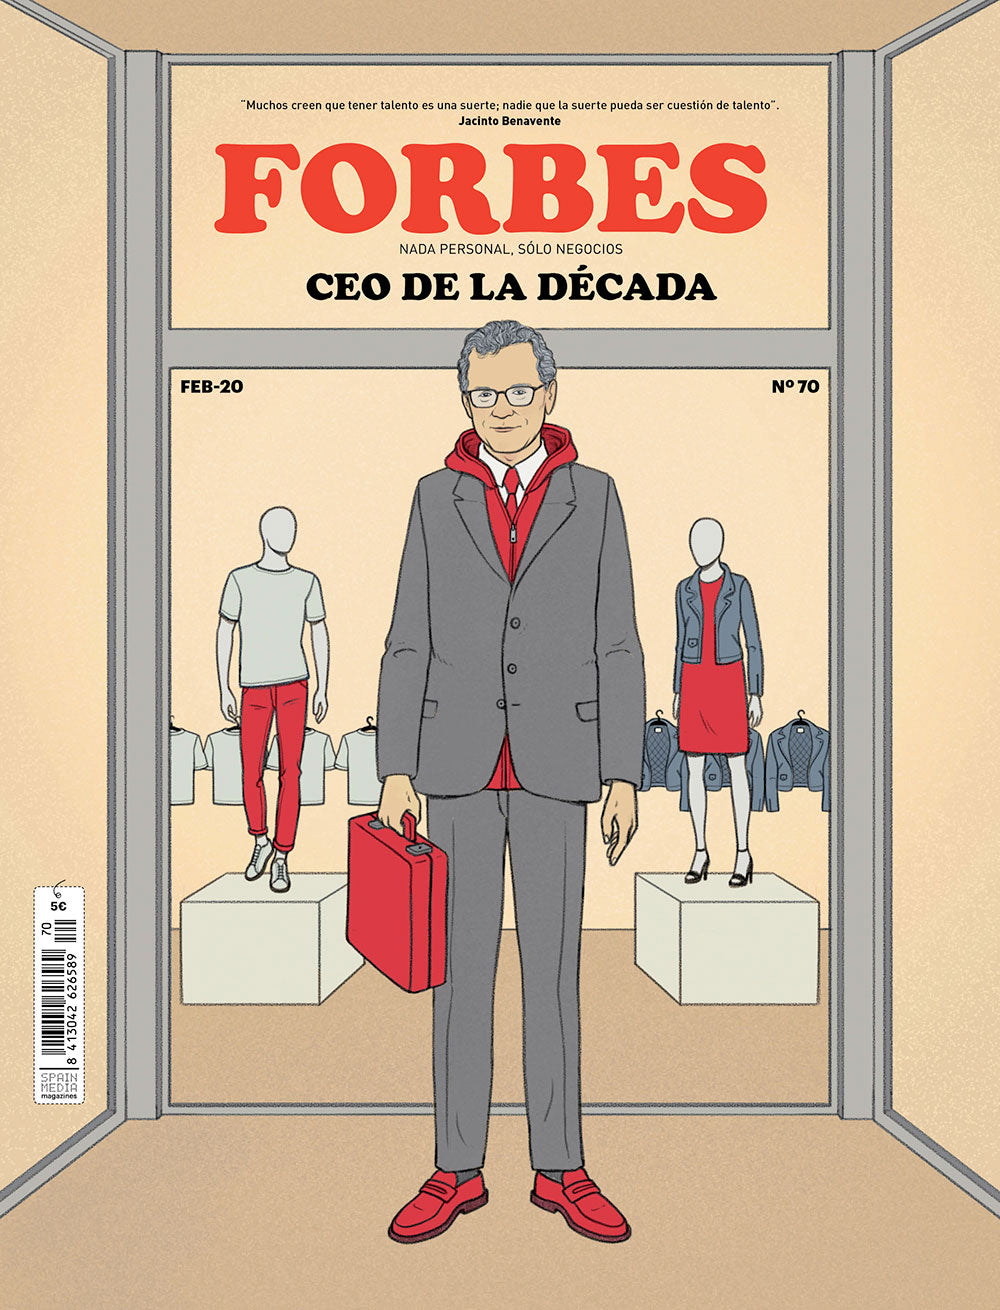 Forbes Ceo Magazine